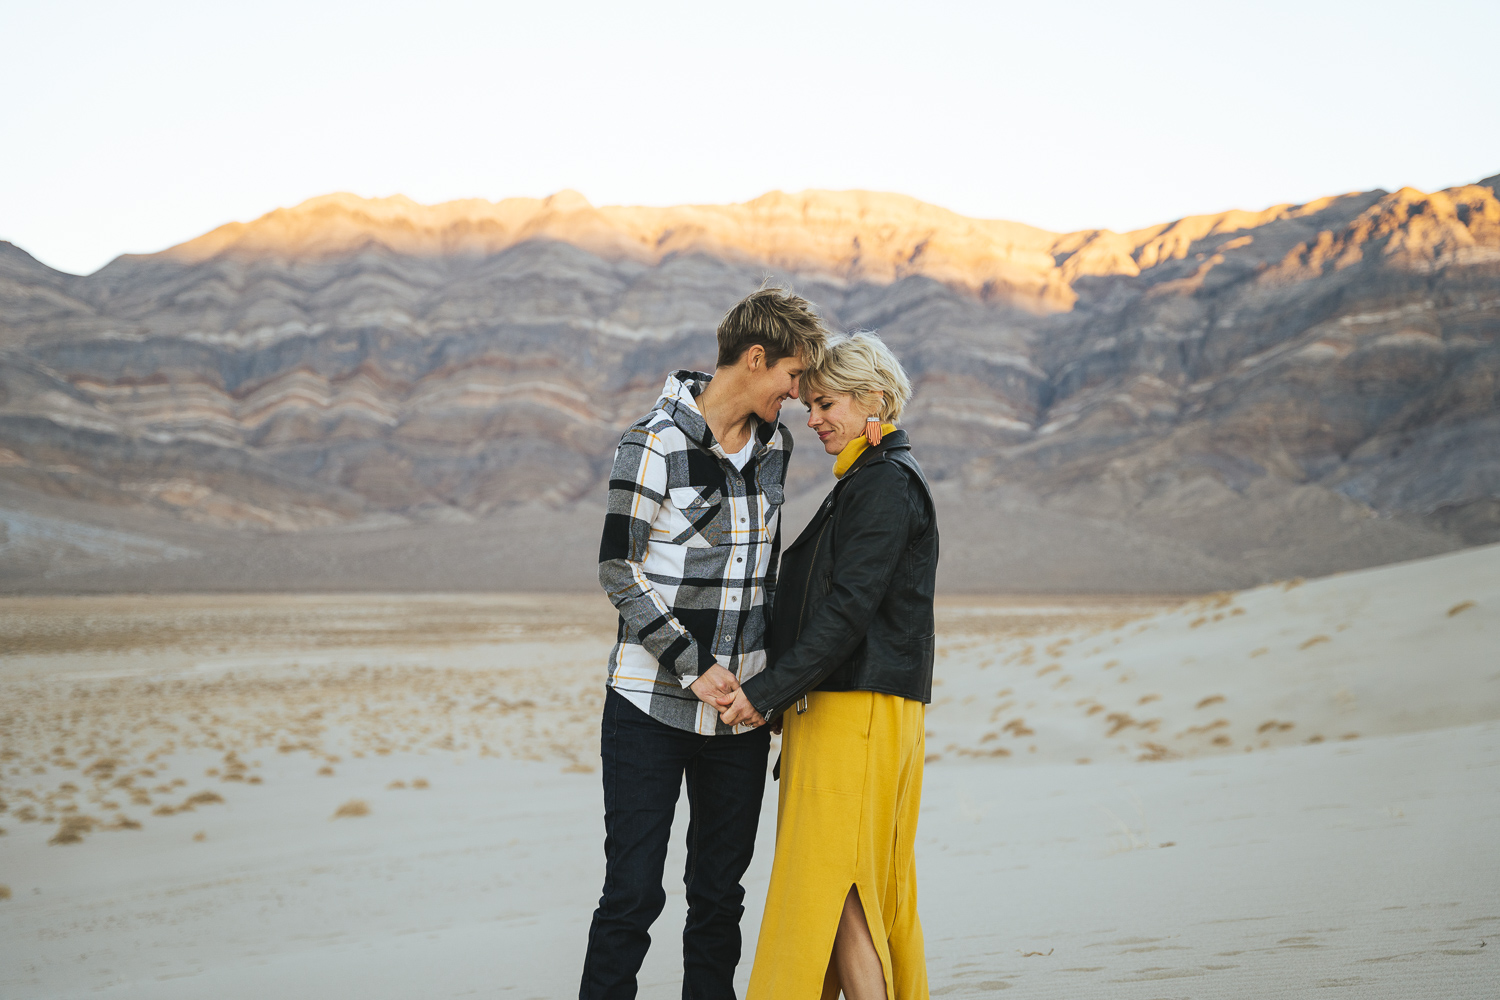 Two brides in the Death Valley Sand dunes, wearing a casual yellow dress